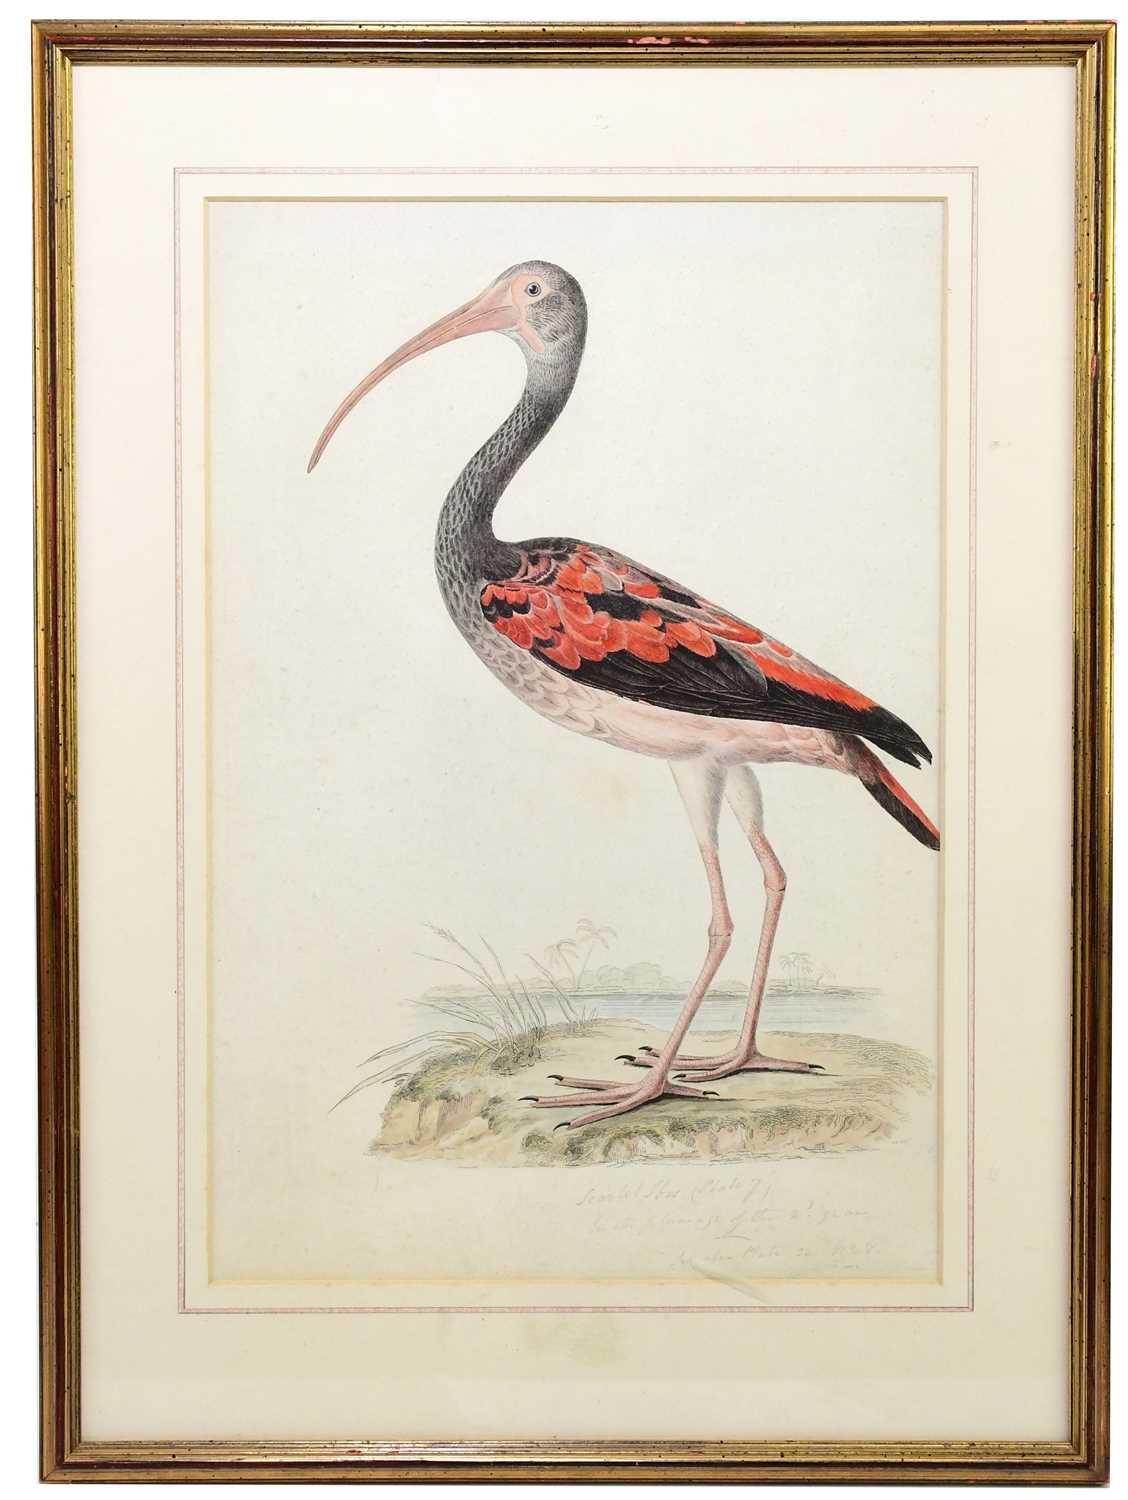 EARLY 19TH CENTURY ENGLISH SCHOOL; hand coloured engraving, feathered ibis, 39 x 26.5cm, framed